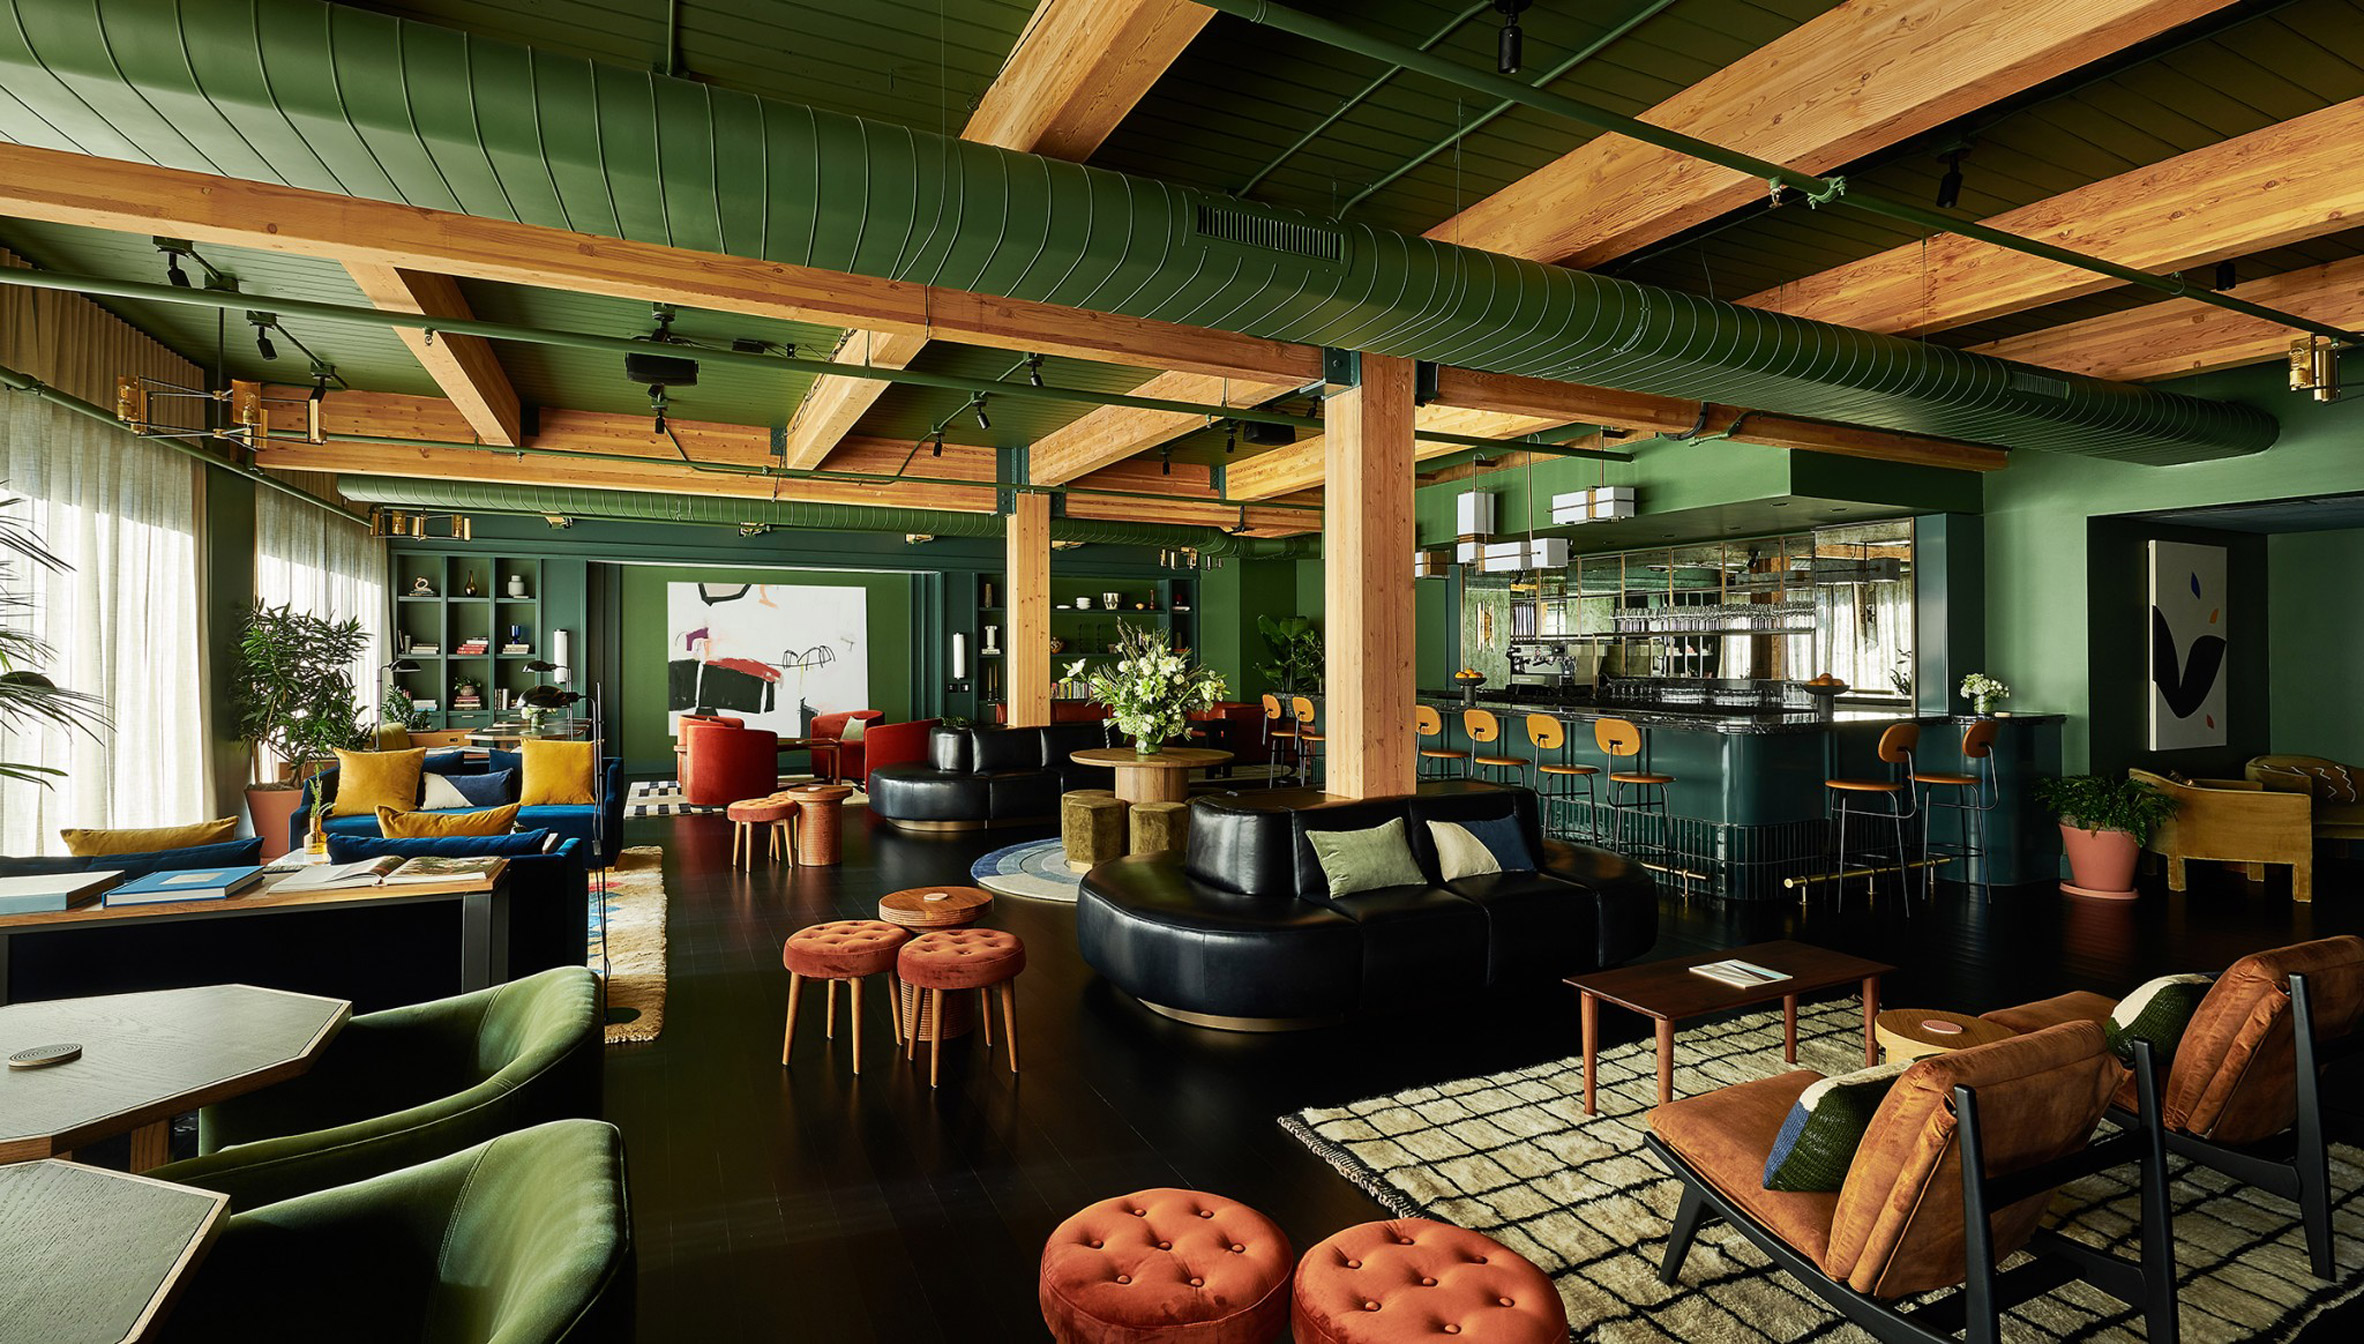 Lounge of Chief Chicago clubhouse with exposed timber beams, green walls and multicoloured seating